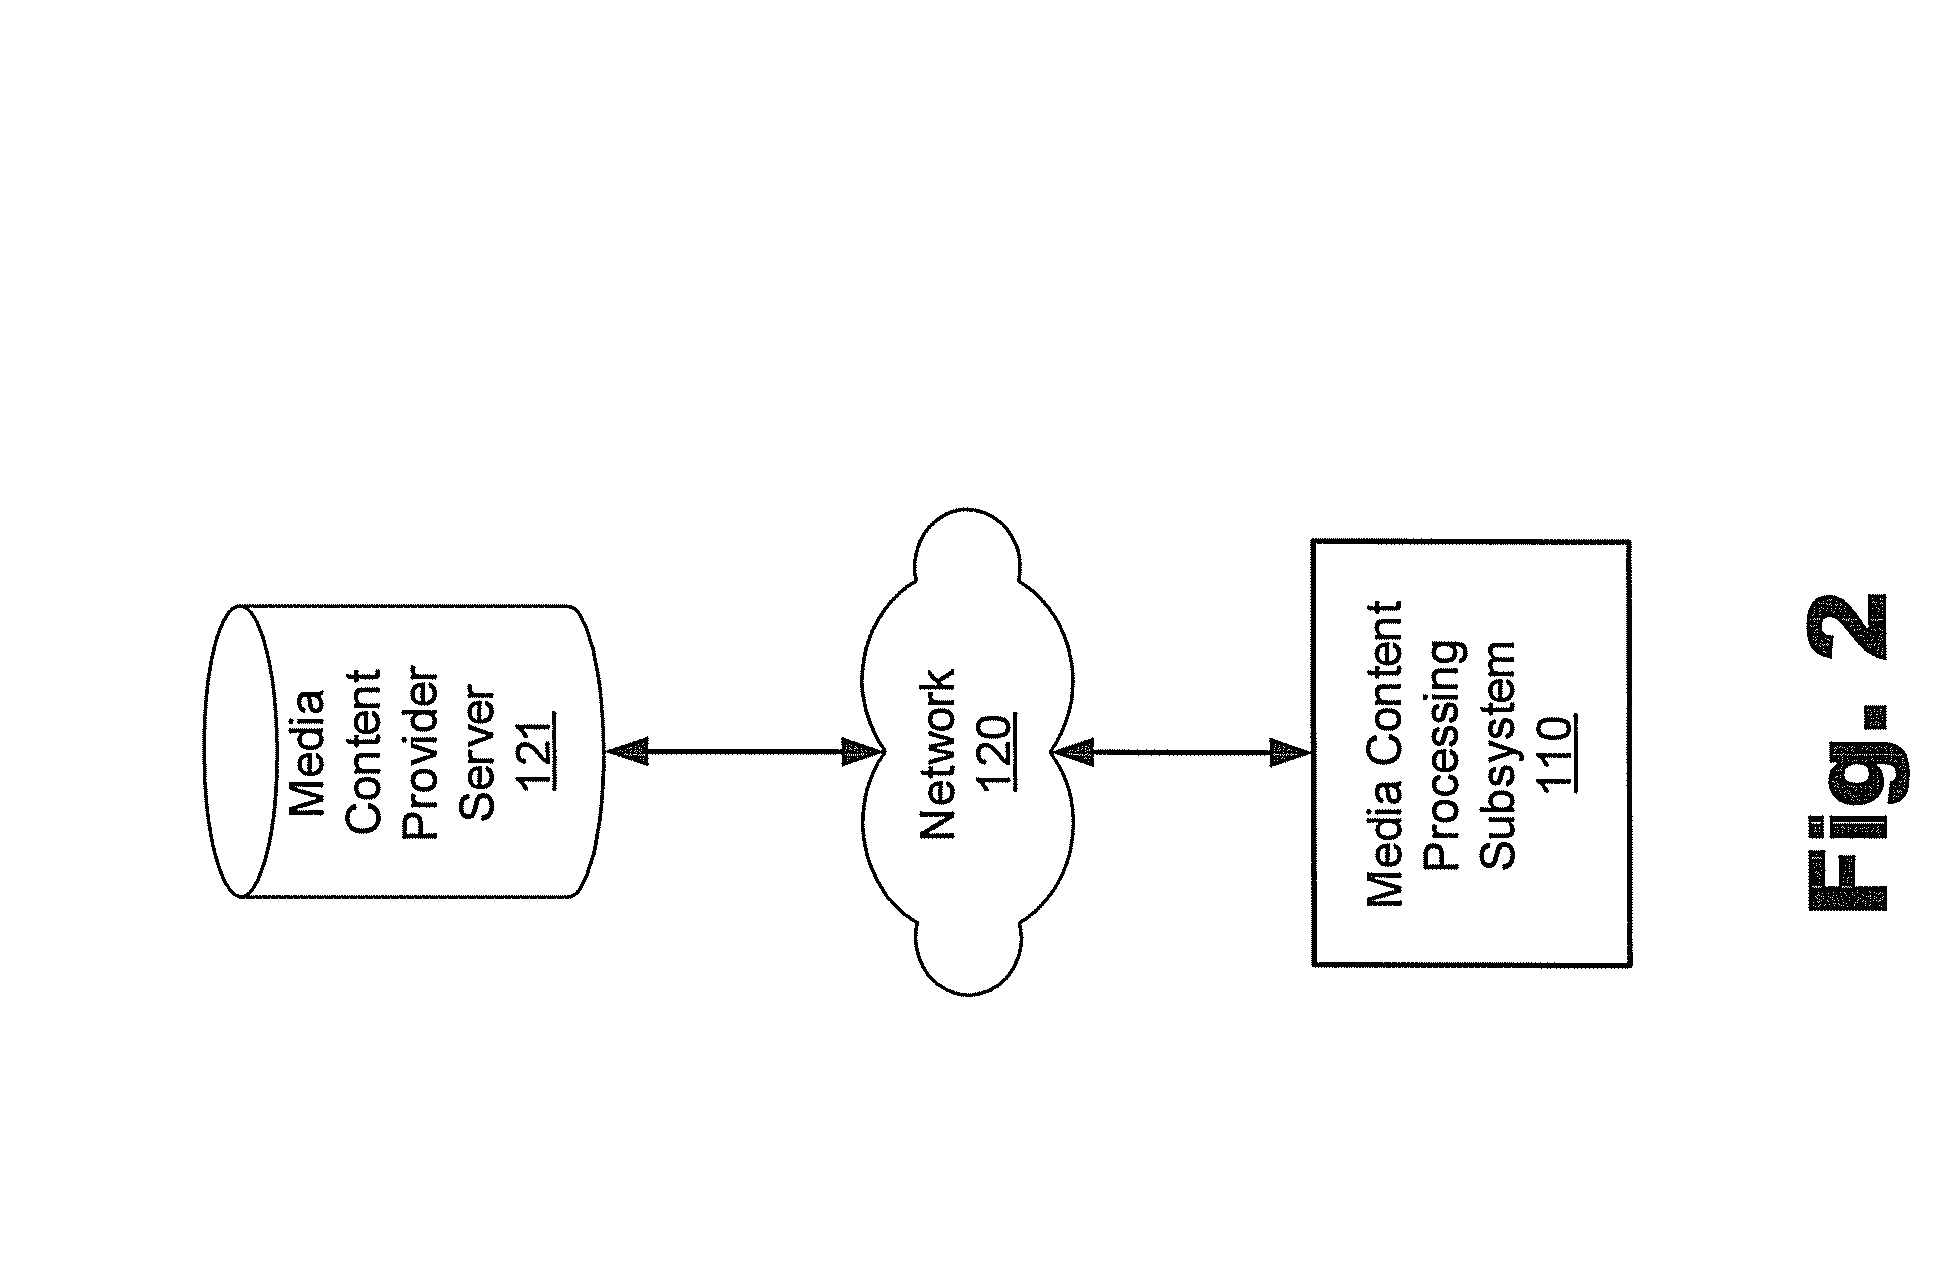 Program guide navigation tools for media content access systems and methods